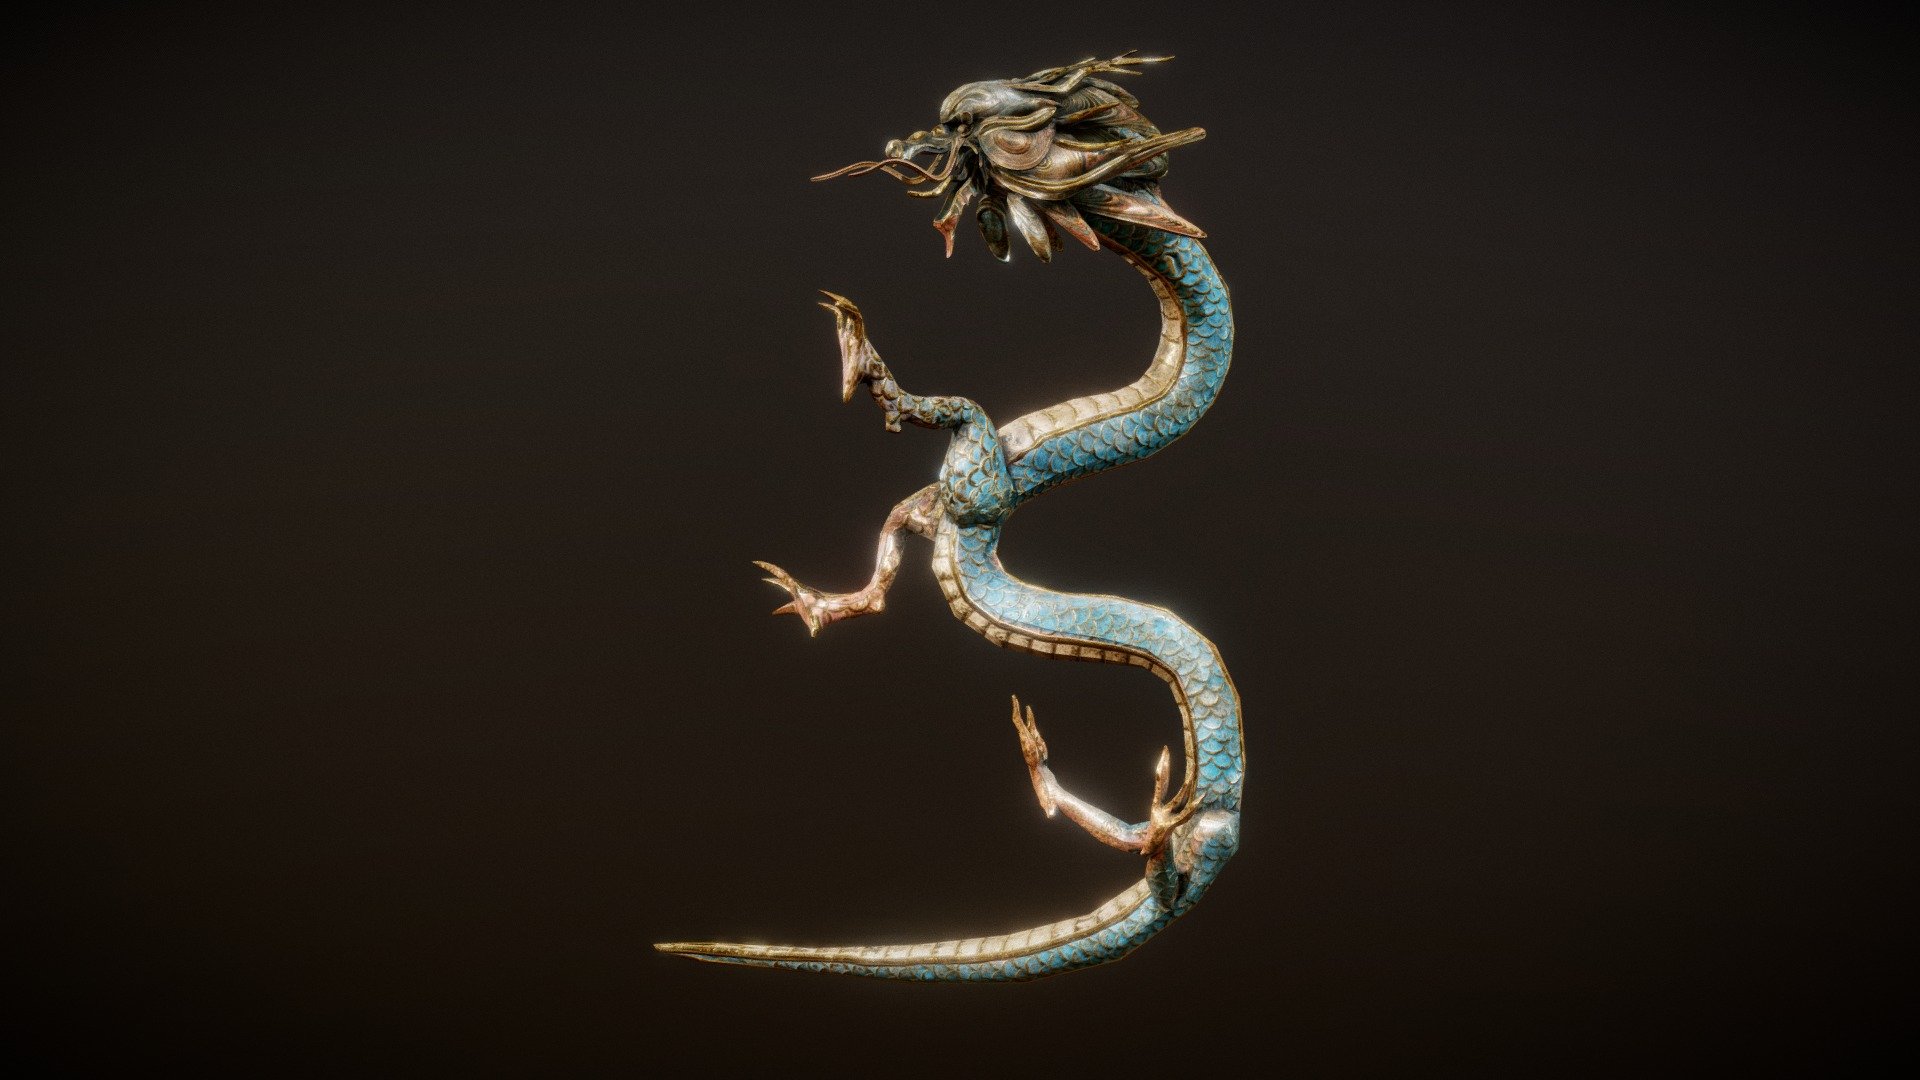 Korean Ornamental Dragon 🐉

A metallic Korean Dragon, painted blue and red symbolizing a protective divine being. Part of a bigger character project. 

Model for games made with Zbrush, Maya, Substance Painter, Marmoset Toolbag - Korean Ornamental Dragon - Buy Royalty Free 3D model by Juani Forn (@juanmartin) 3d model